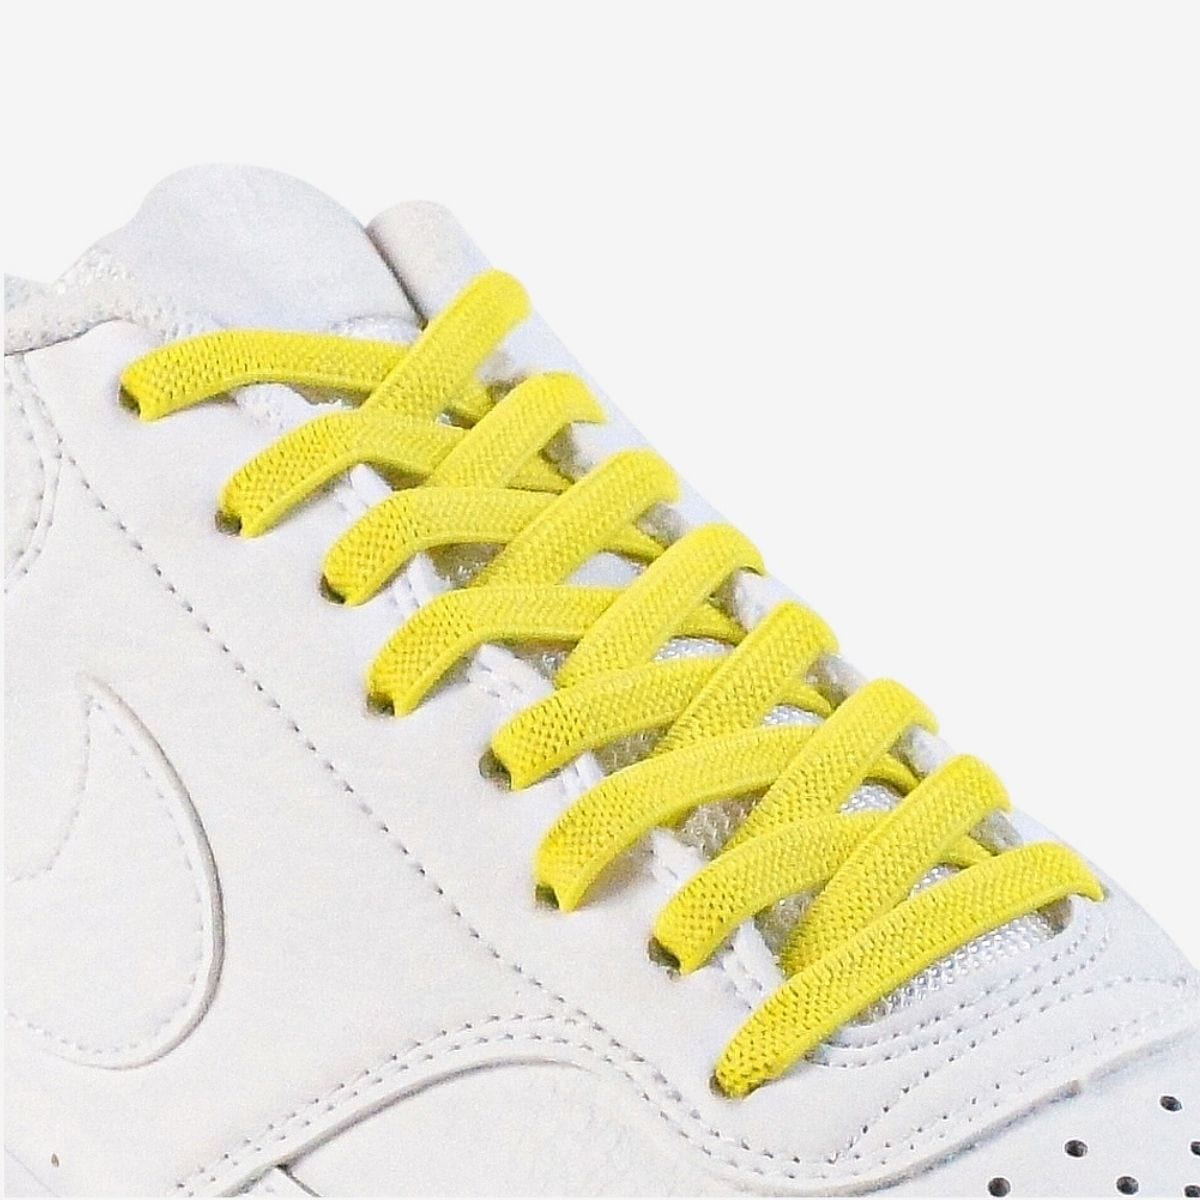 kids-no-tie-shoelaces-with-yellow-laces-on-nike-white-sneakers-by-kicks-shoelaces